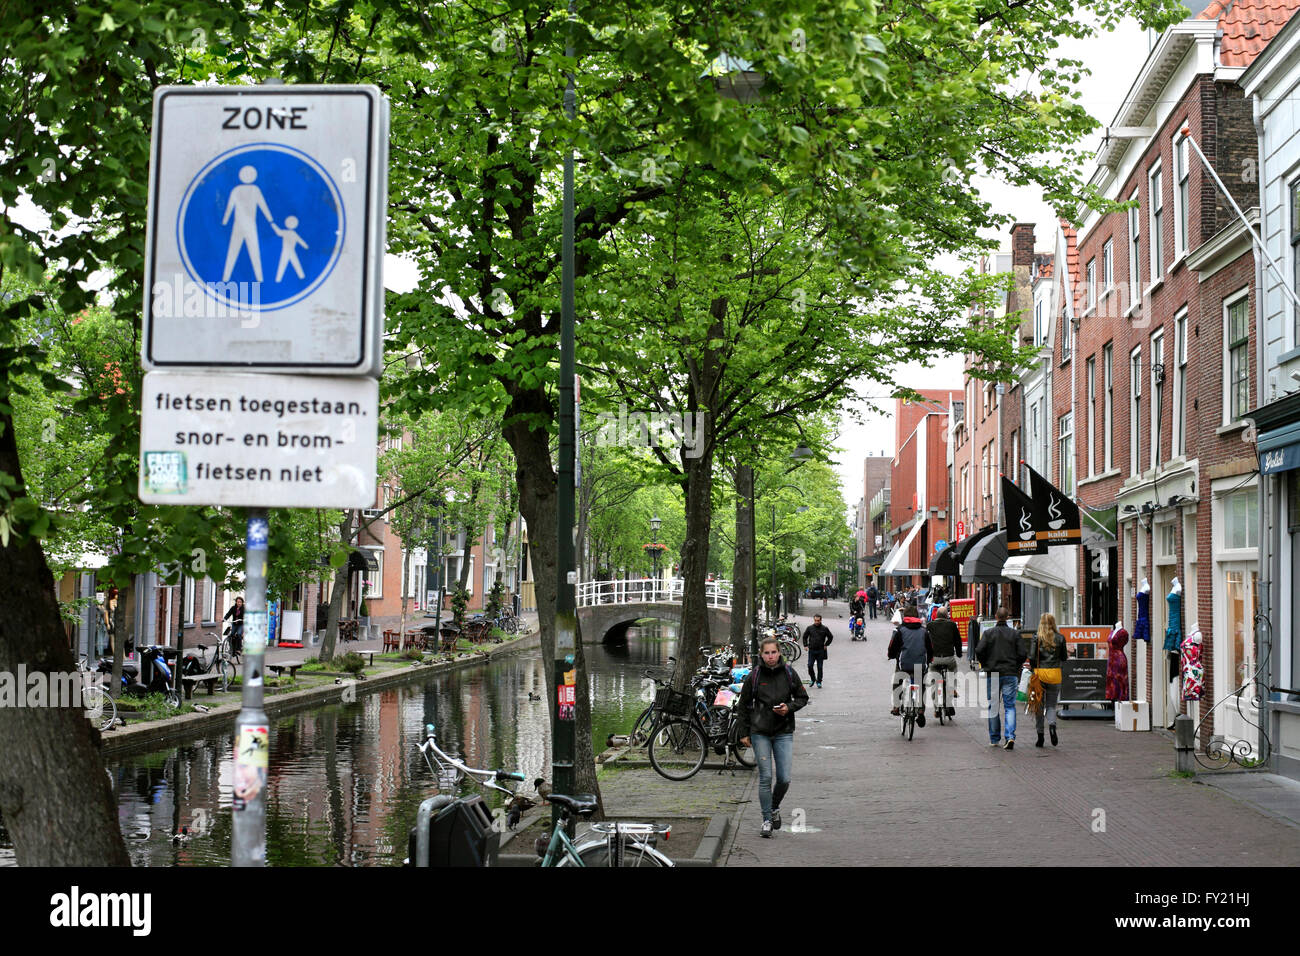 A pedestrian zone sign in Molslaan, in Delft town centre, The Netherlands Stock Photo